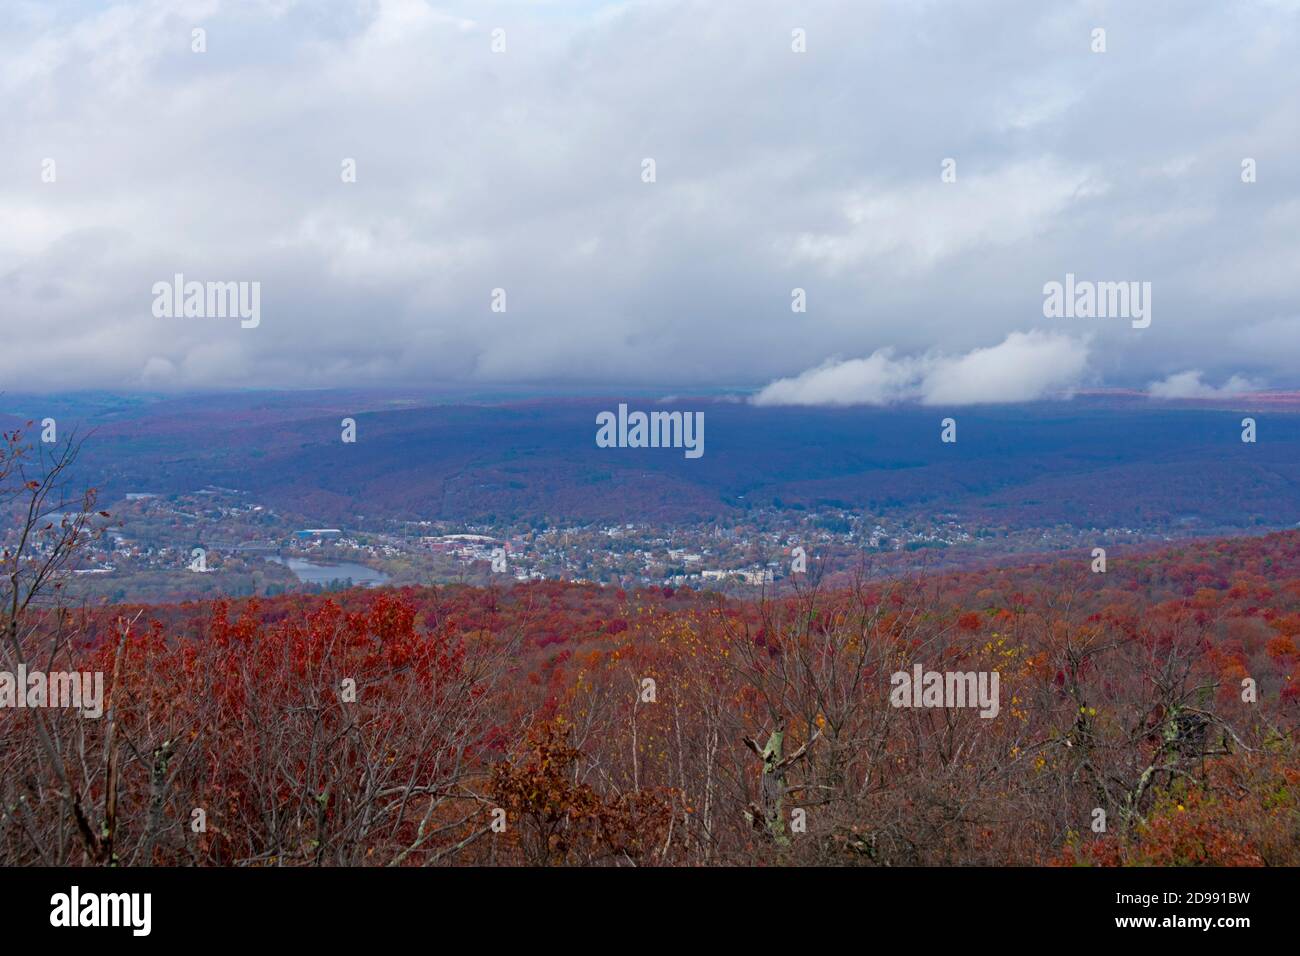 Cloudy skies, the town of Port Jervis, in New Yor, and lush Autumn foliage at High Point Monument area of High Point State Park in New Jersey, USA -05 Stock Photo